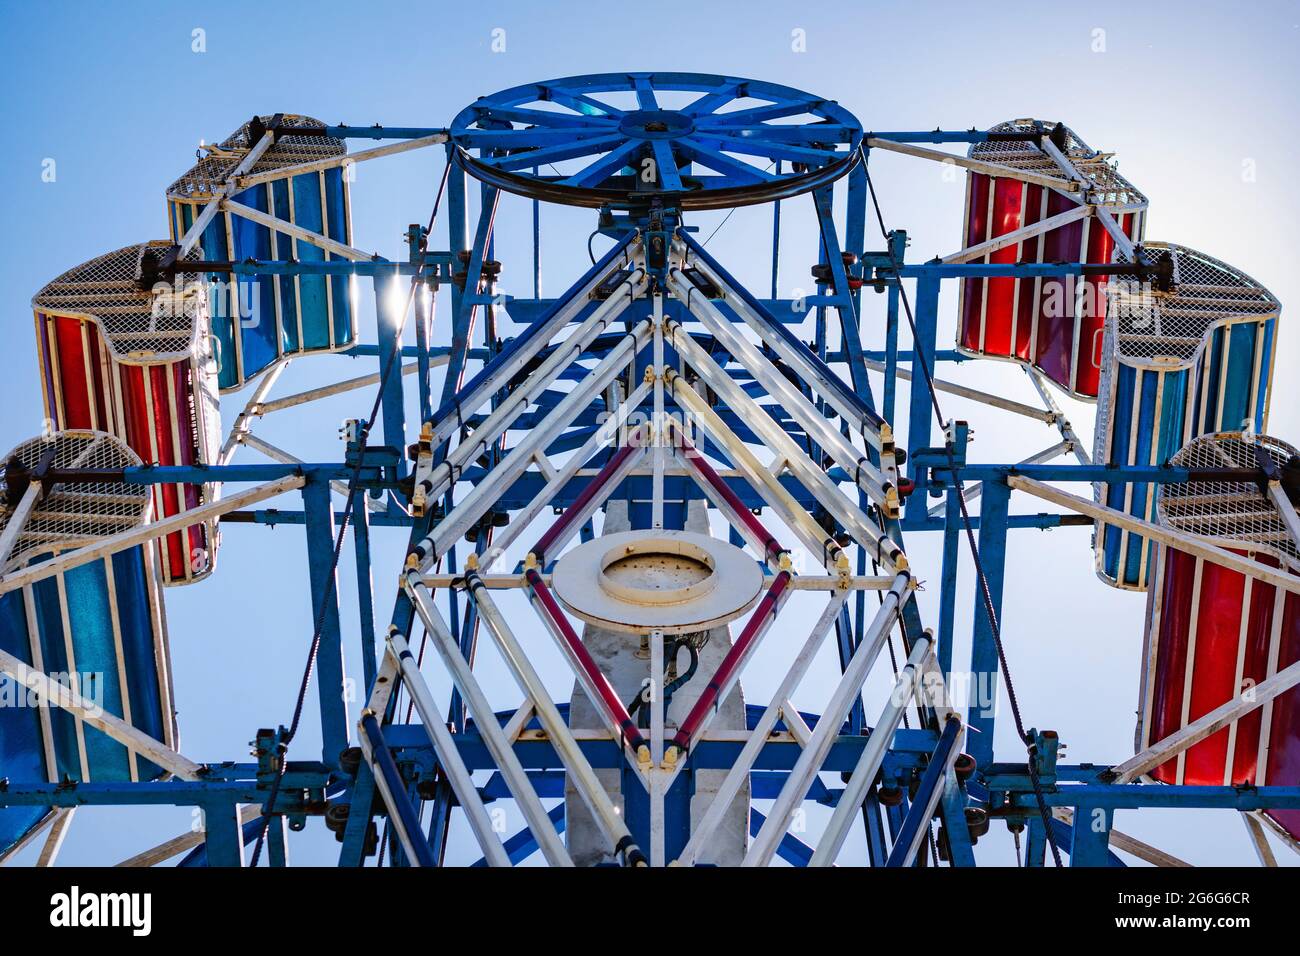 The zipper ride at a carnival against a blue sky. Stock Photo